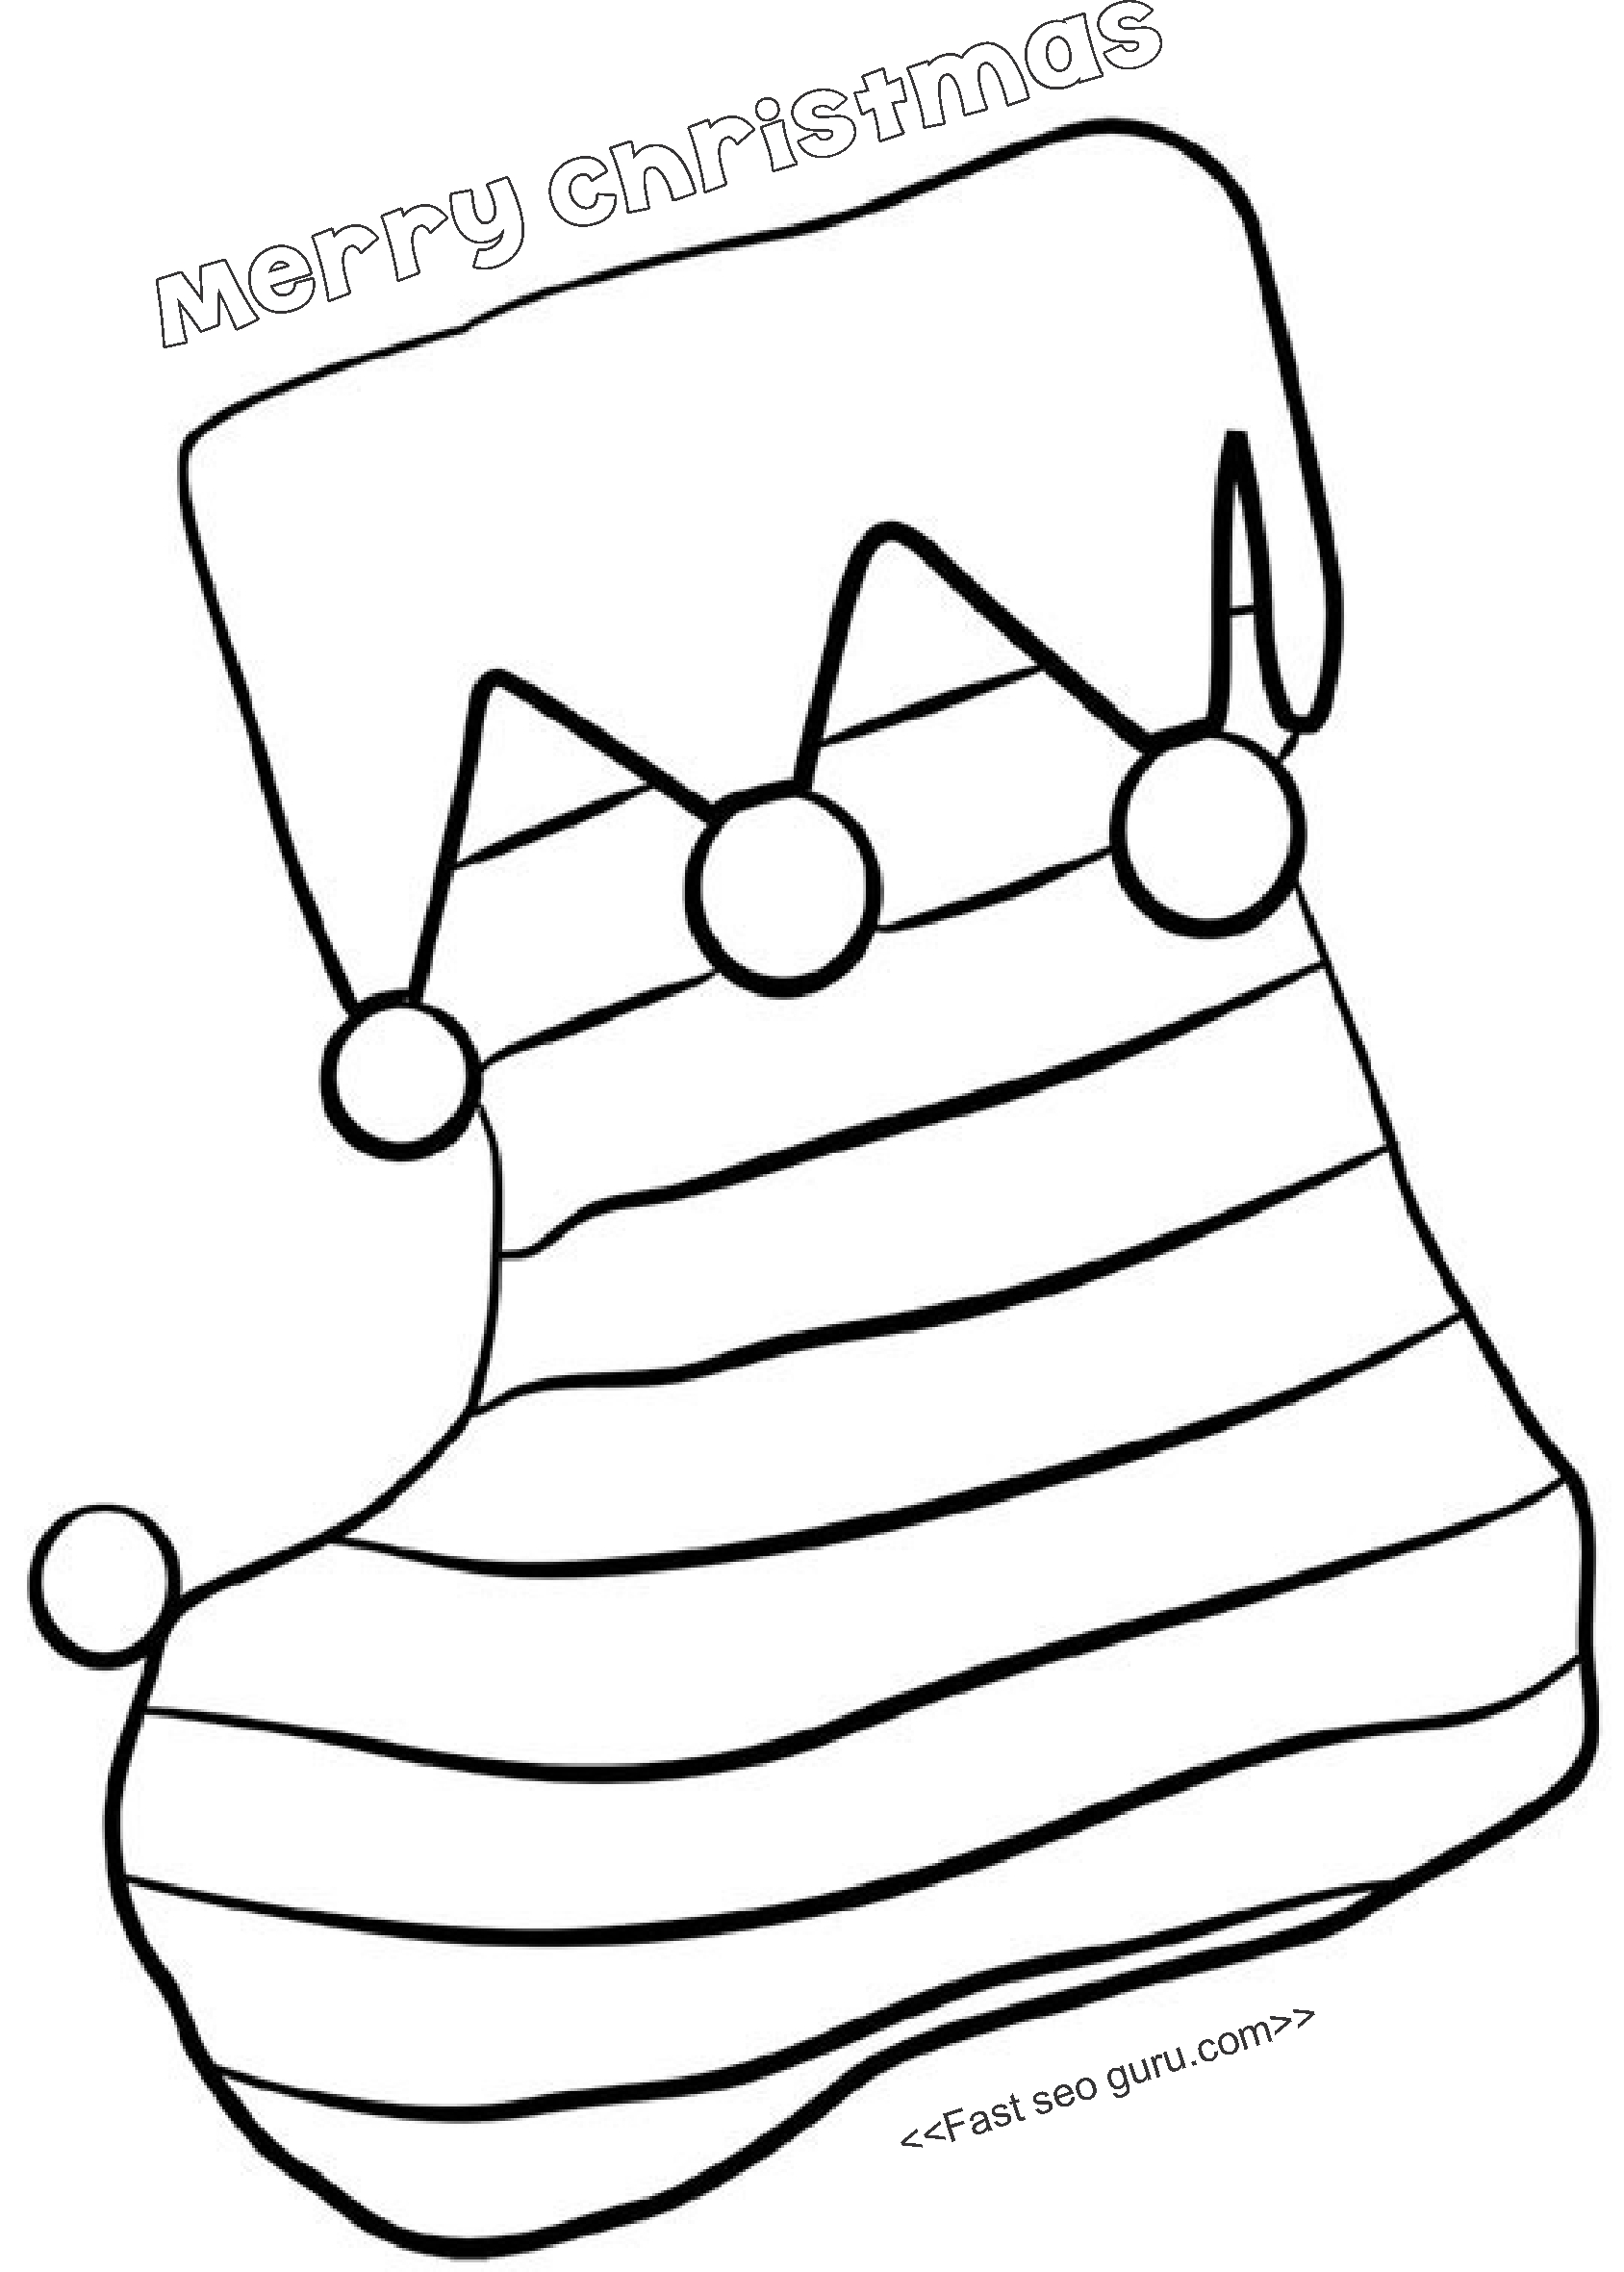 Christmas Stocking Coloring Book 4 Coloring Pages